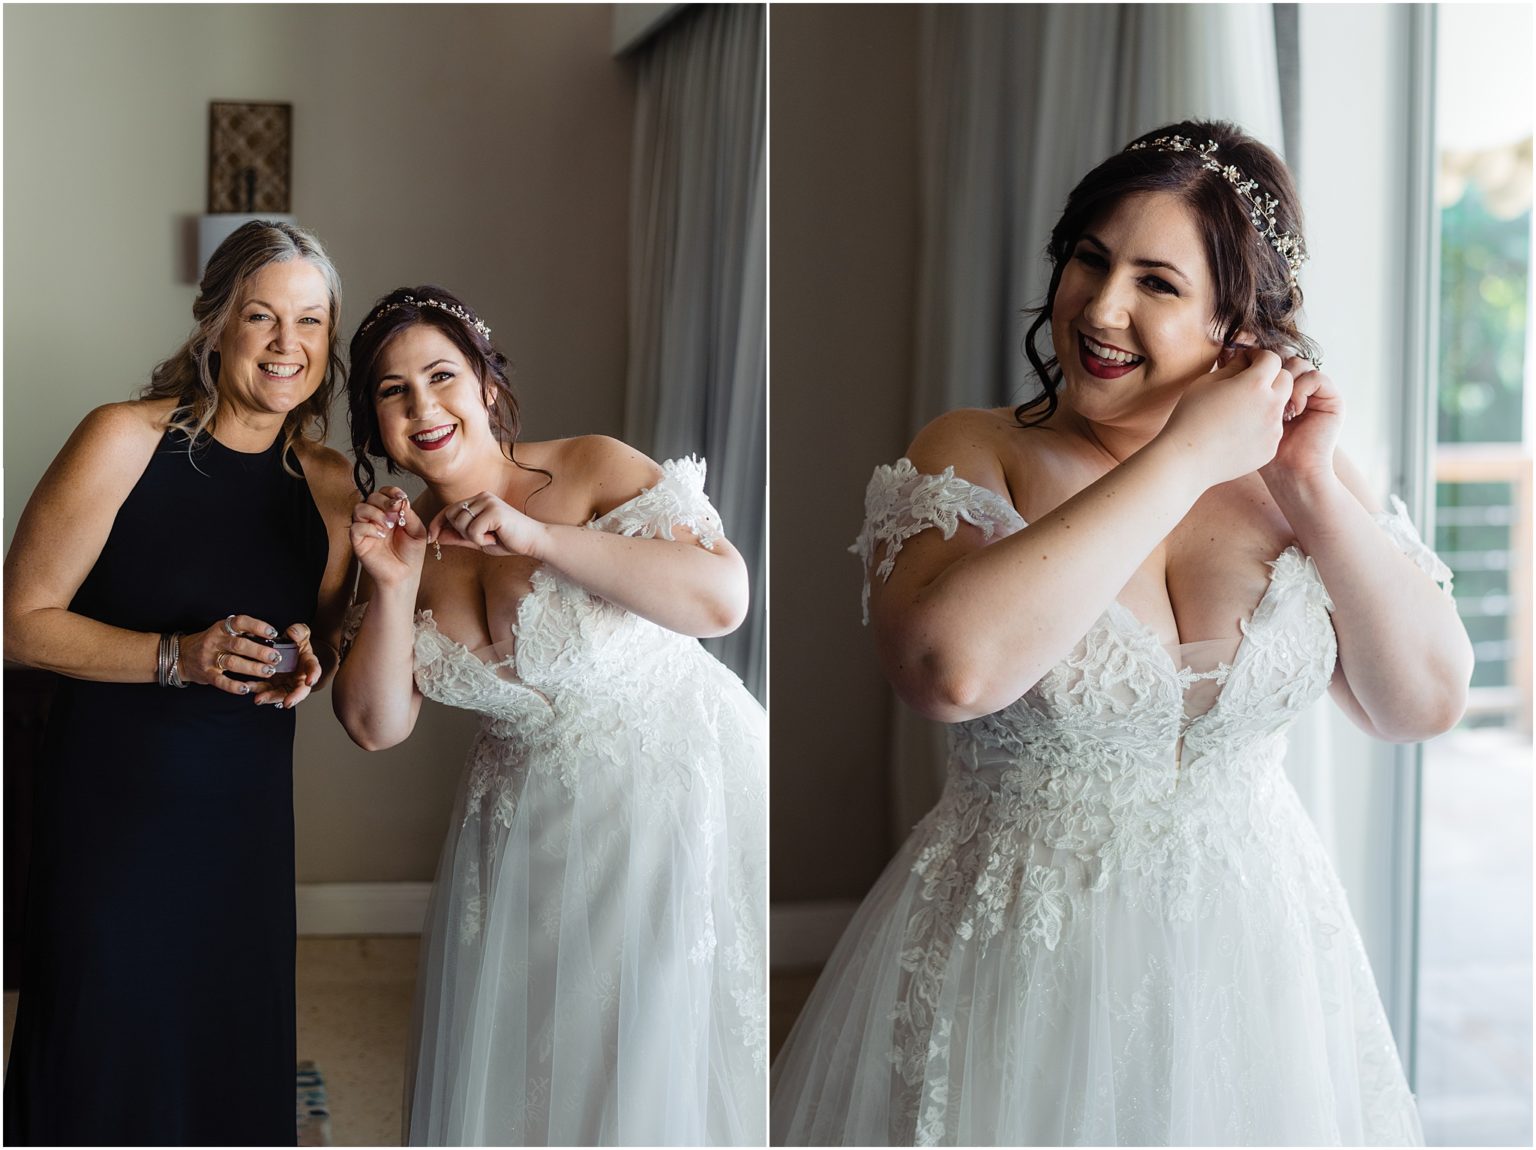 a collage of a woman wearing a wedding dress